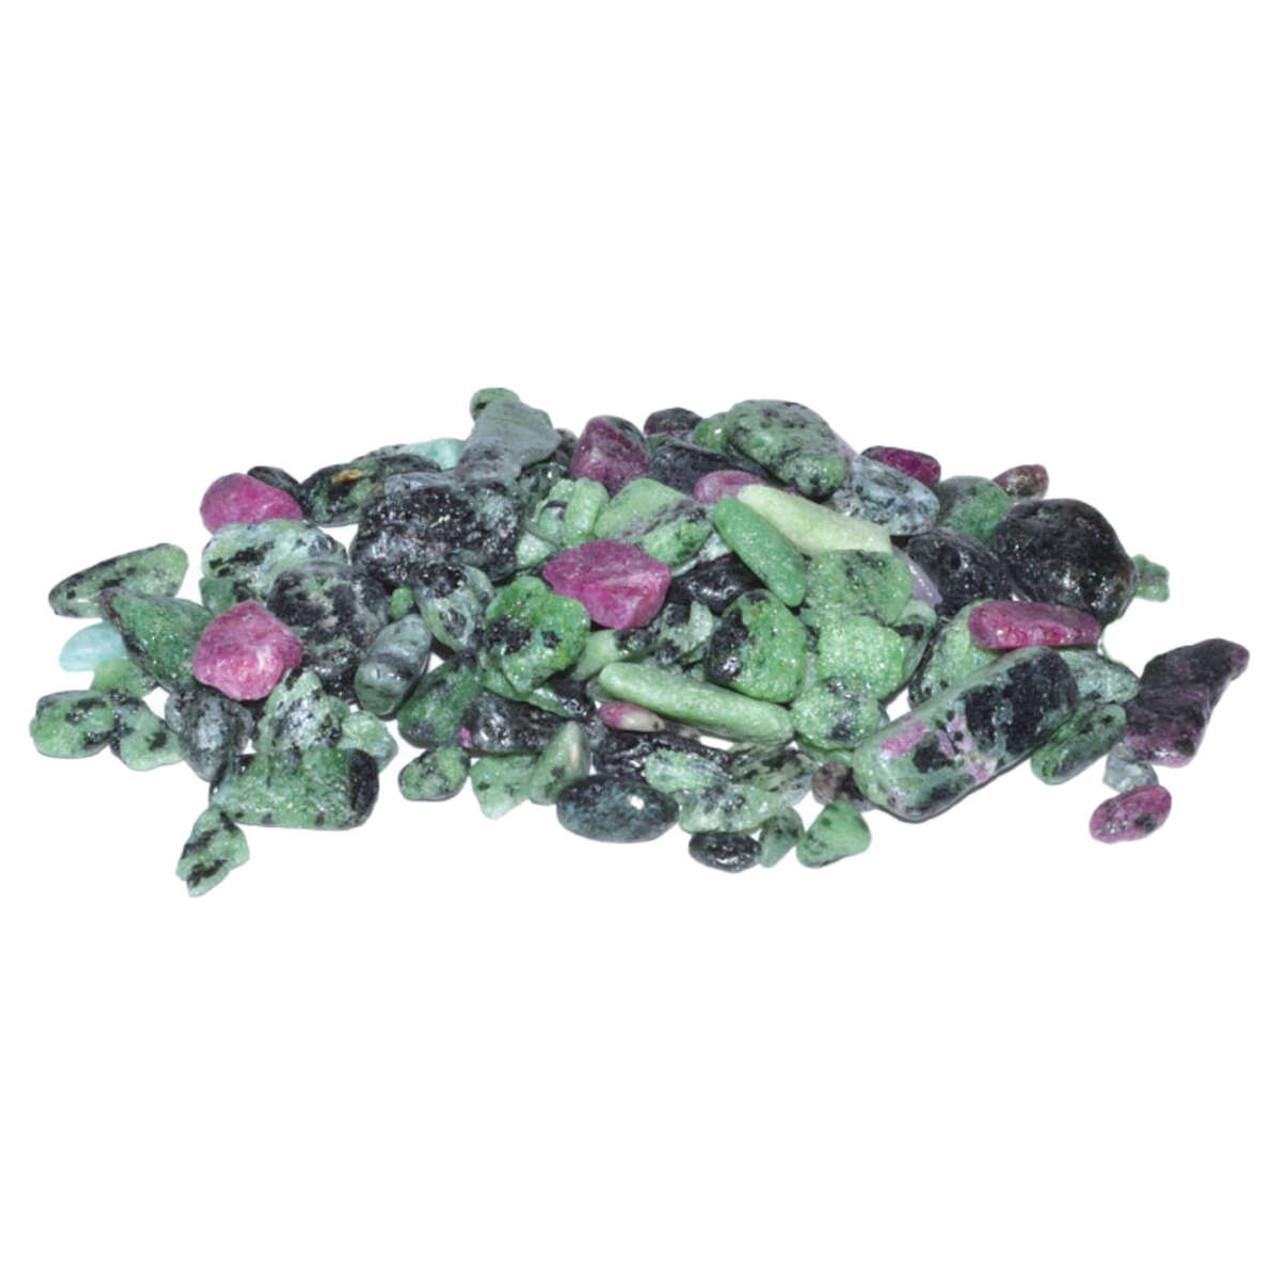 Ruby Zoisite Tumbled Chips 5-7mm 1/4 lb.